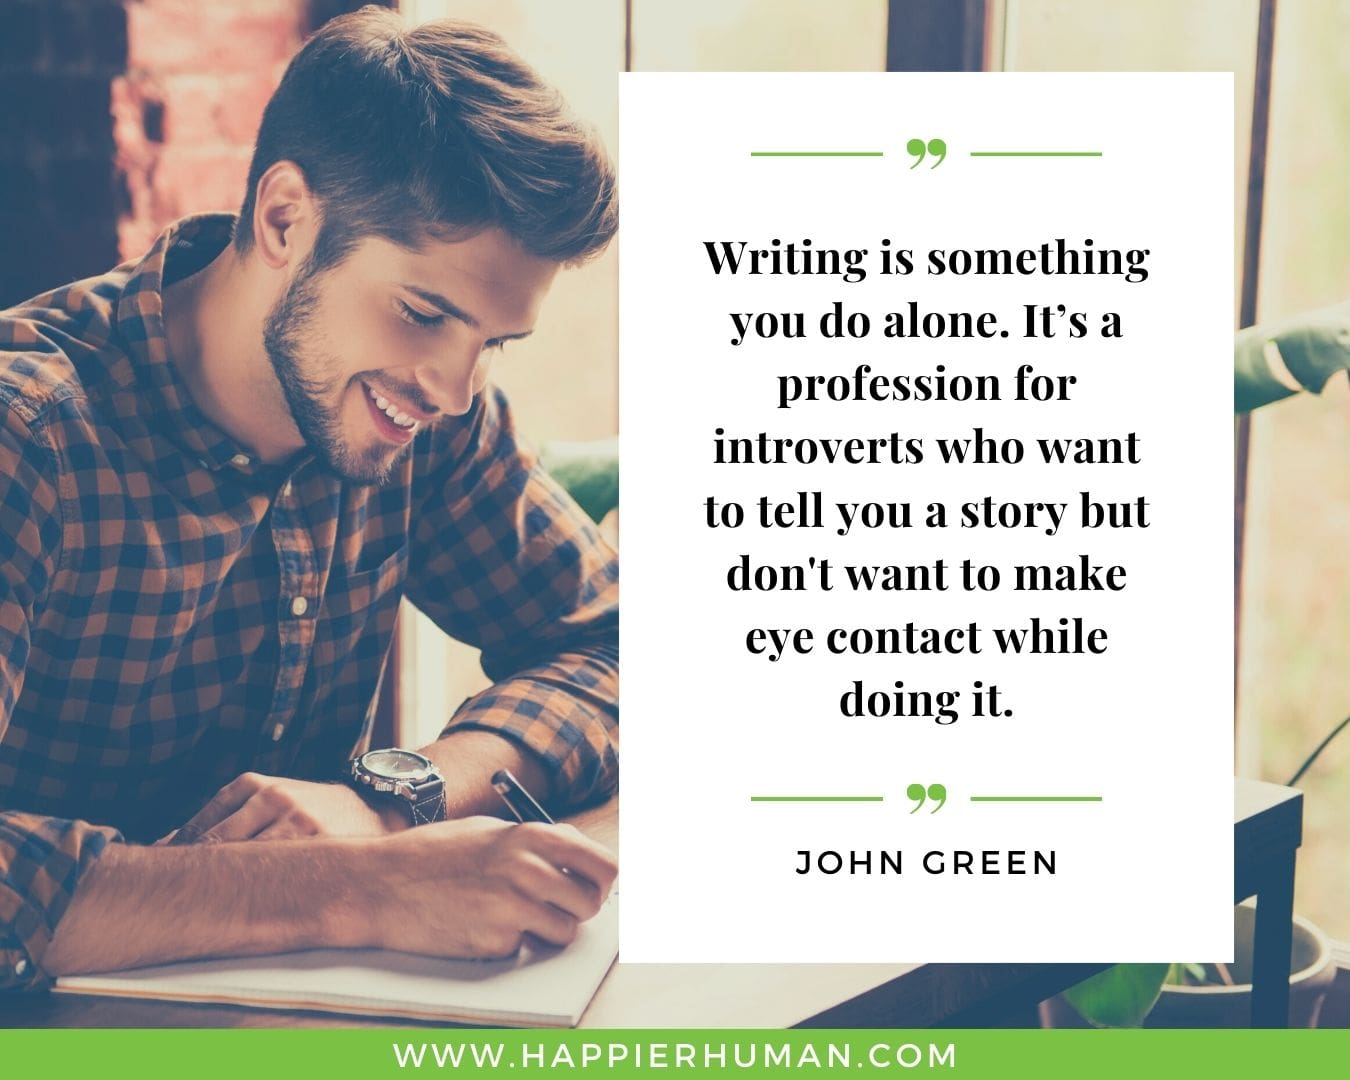 Introvert Quotes - “Writing is something you do alone. It’s a profession for introverts who want to tell you a story but don't want to make eye contact while doing it.” – John Green